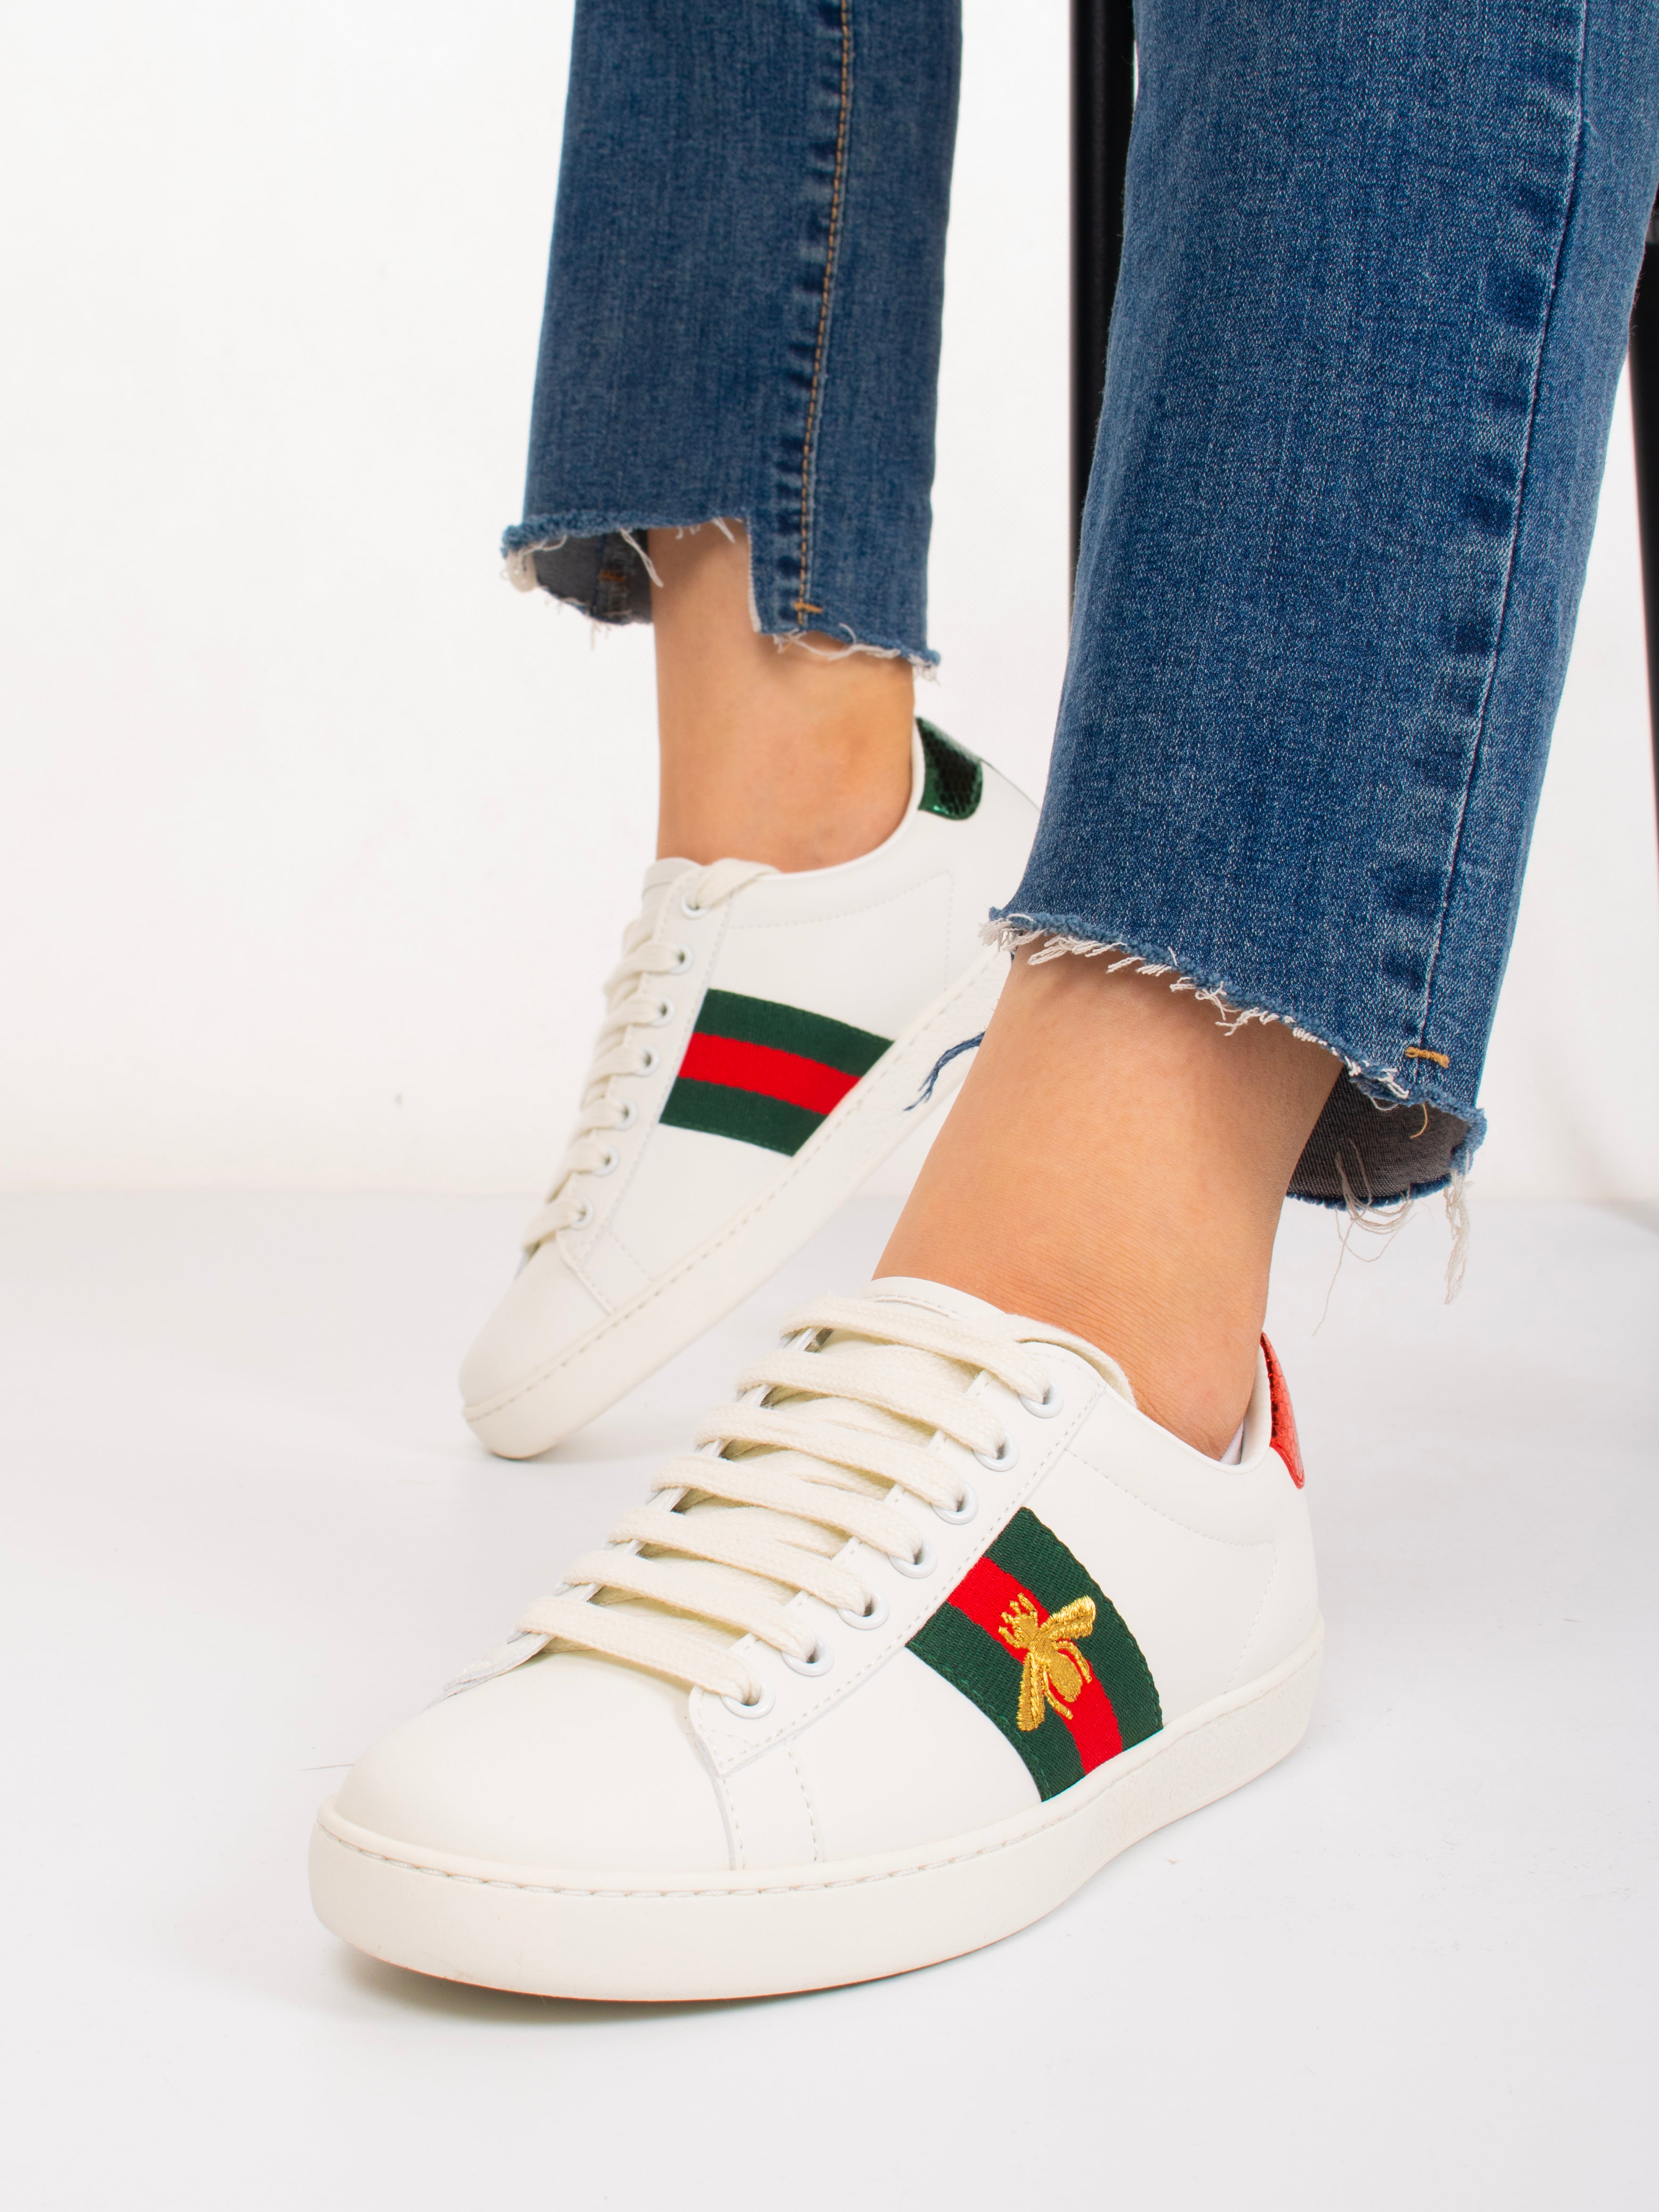 Gucci Ace Leather Sneakers in white